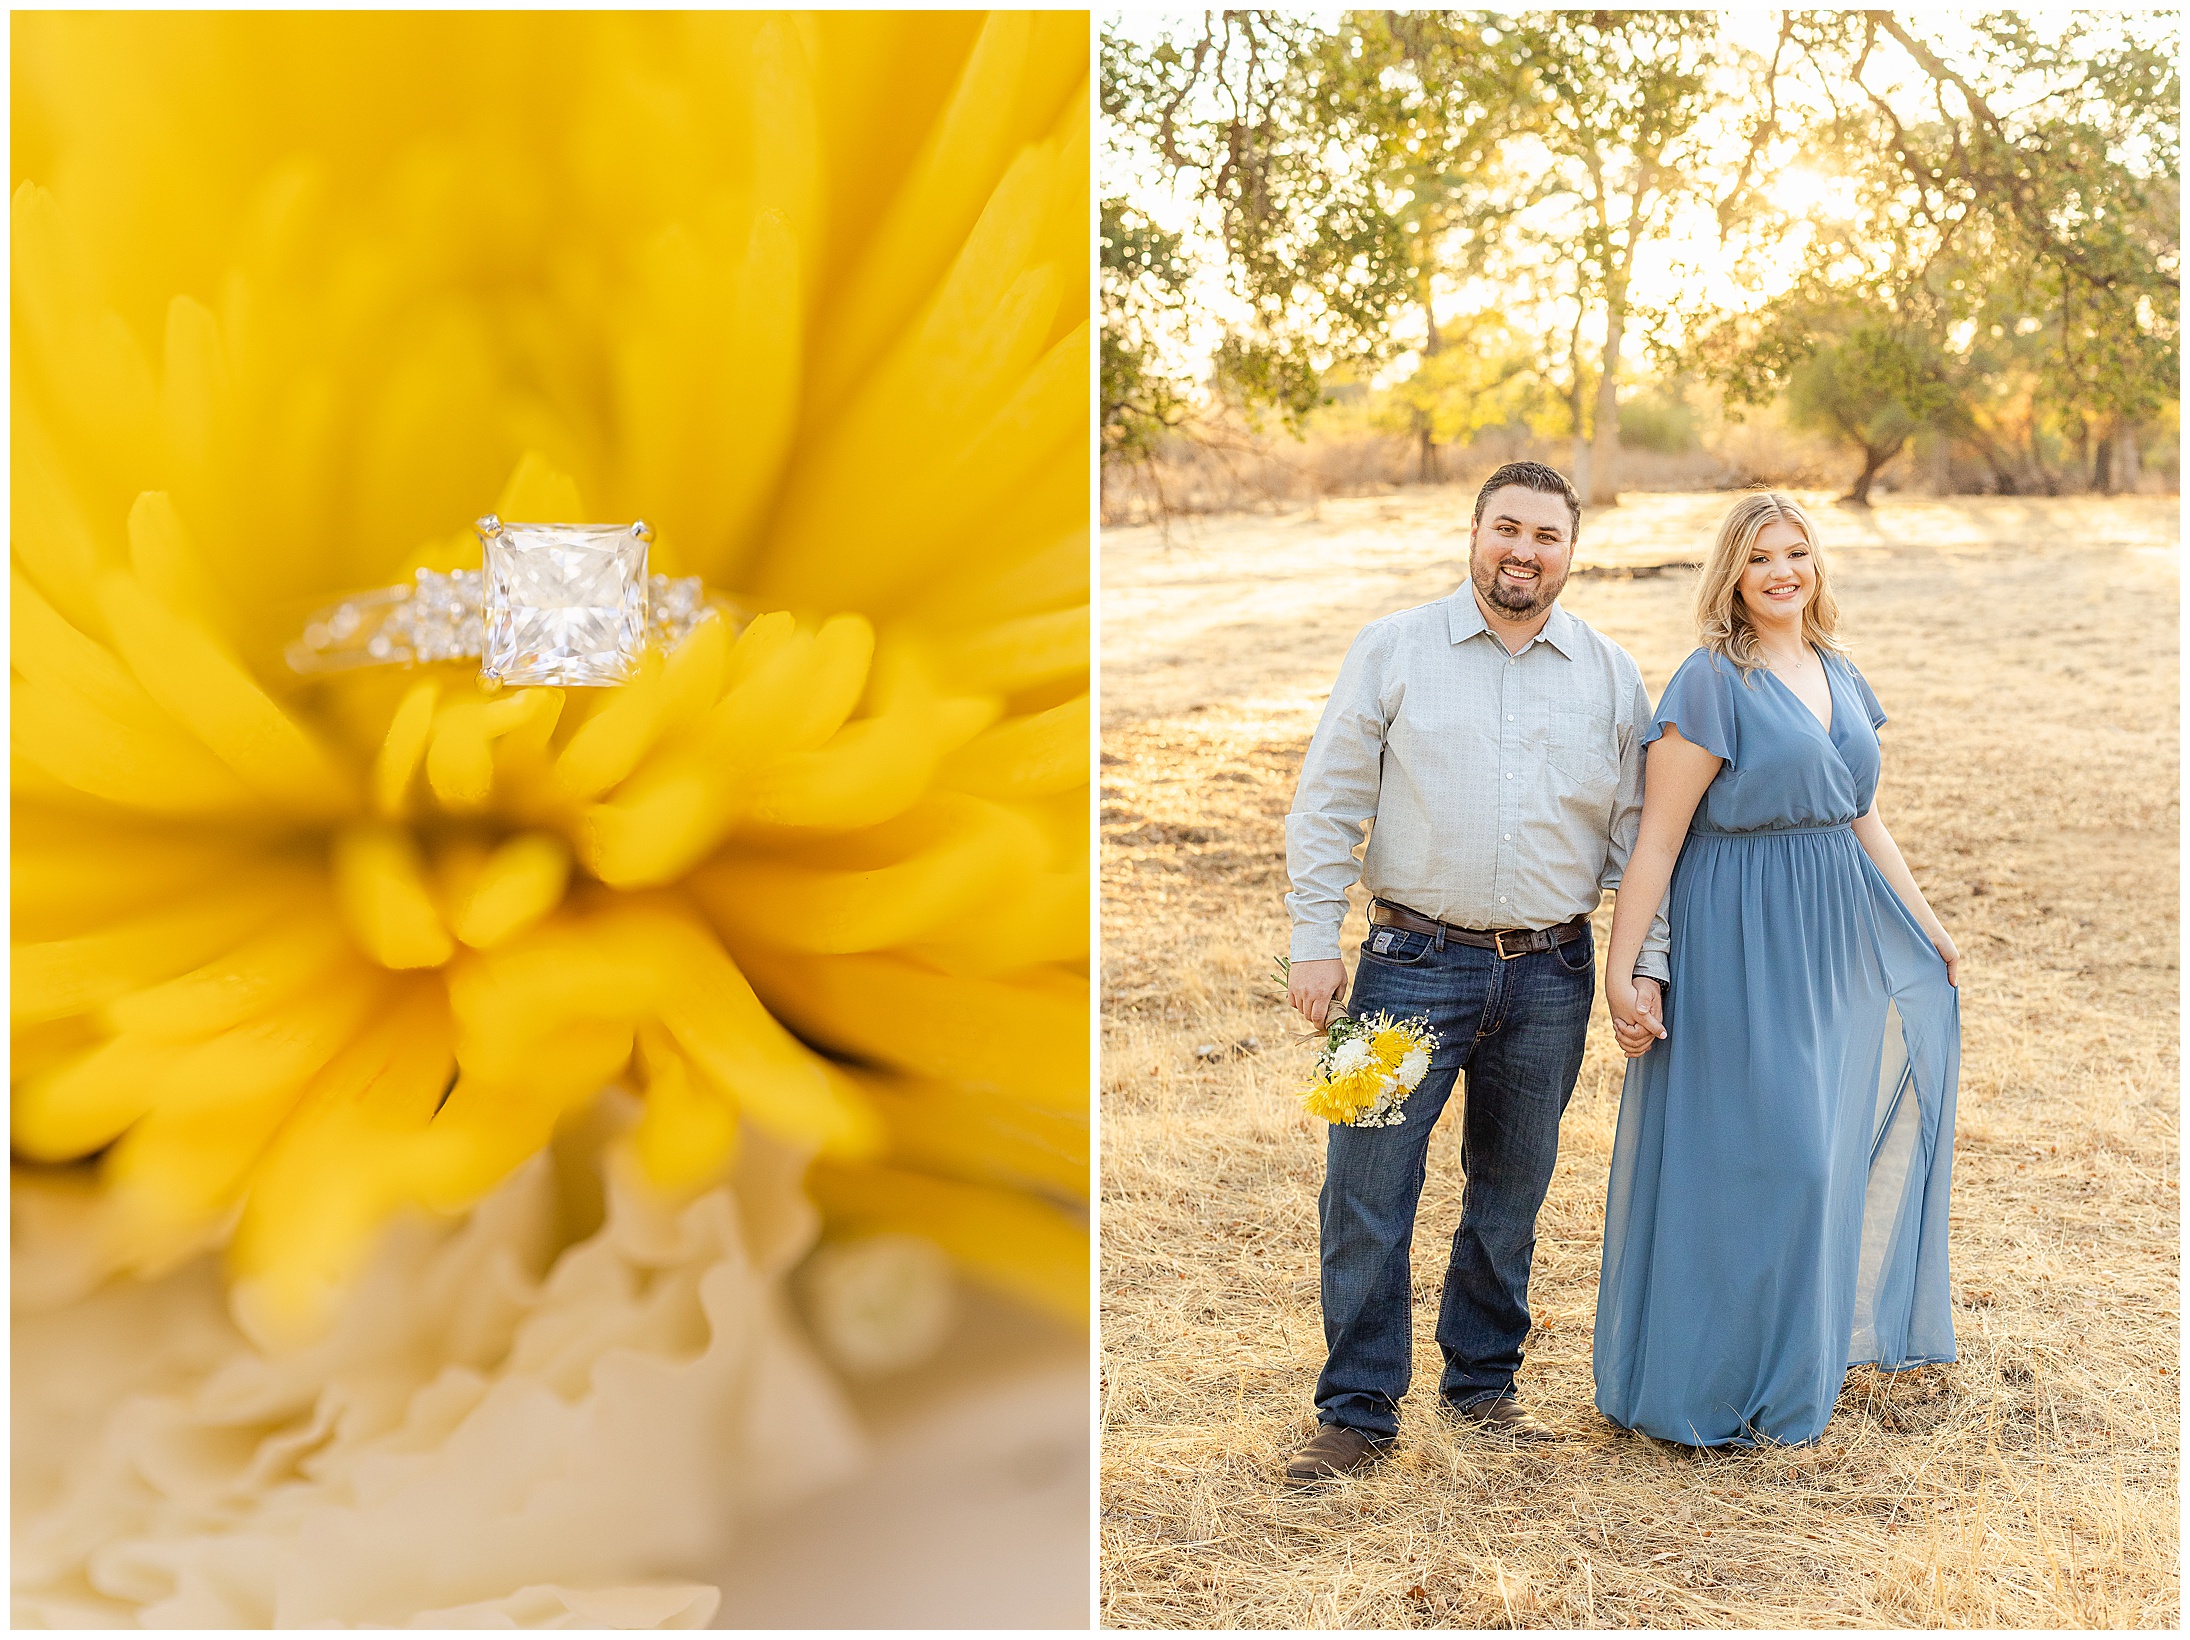 Upper Bidwell Park Engagement Session Chico CA Trail Fall September Yellow Flowers_0017.jpg